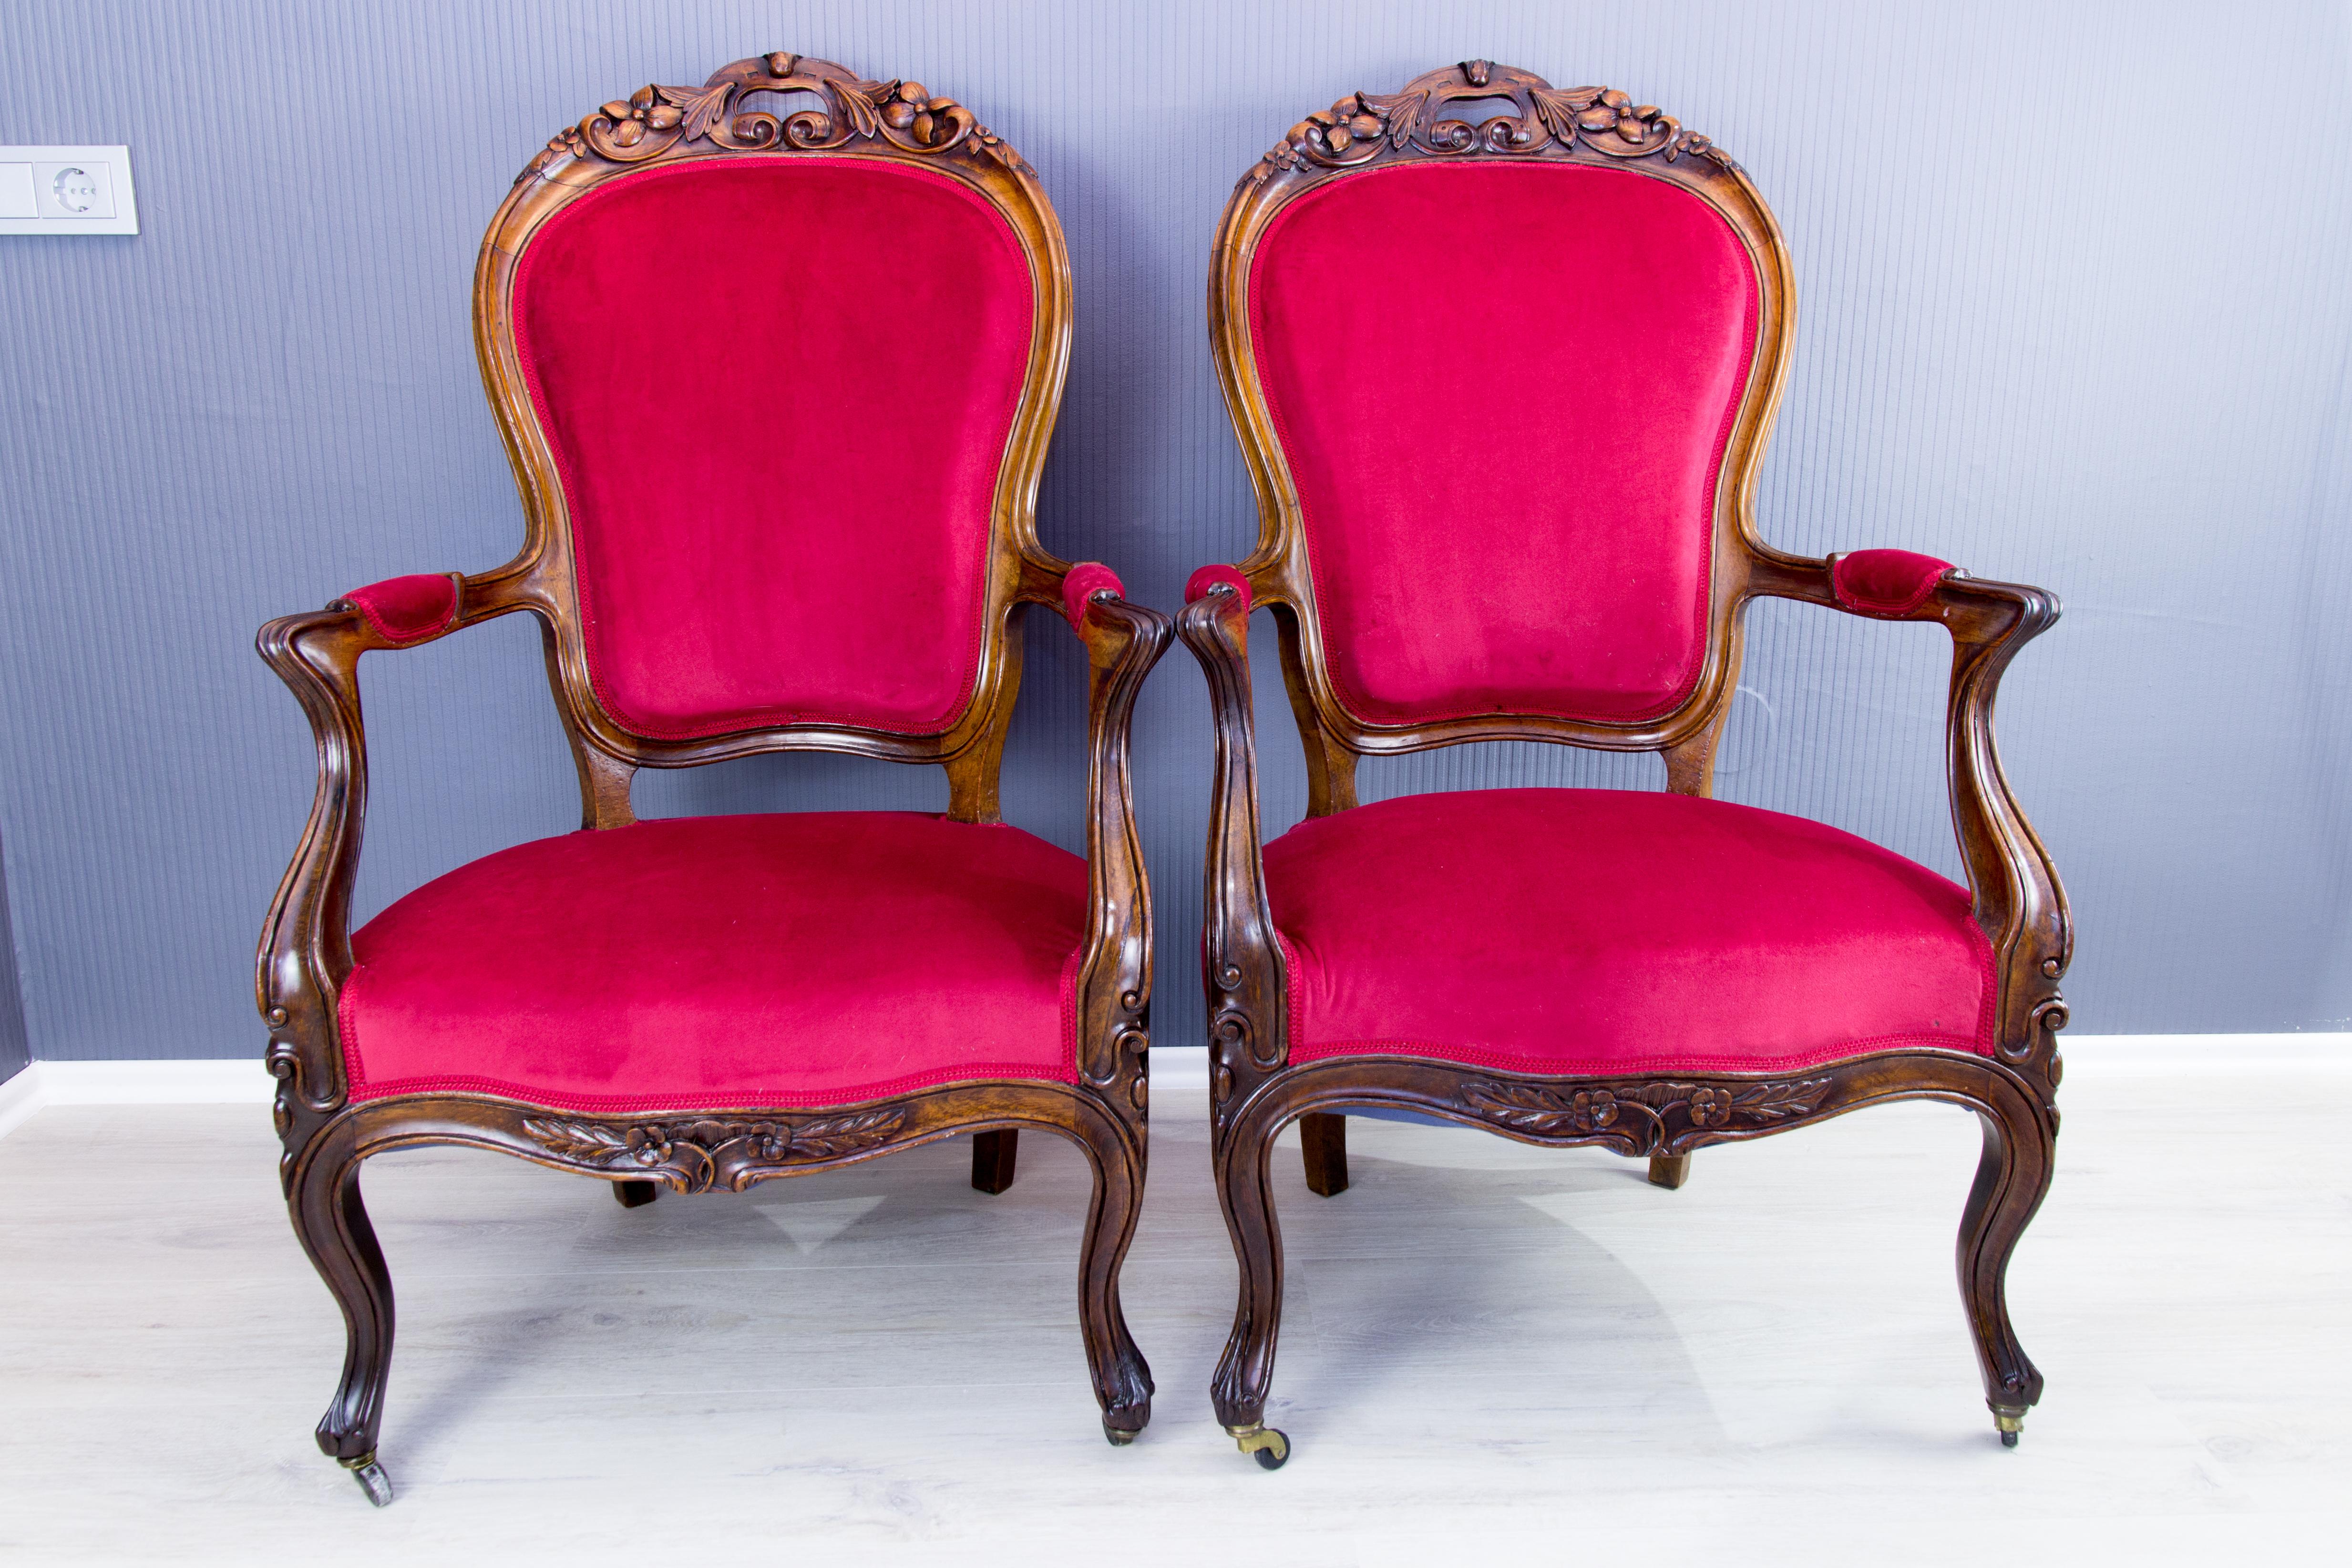 Carved Pair of Louis XV Style French Fauteuil Walnut Armchairs